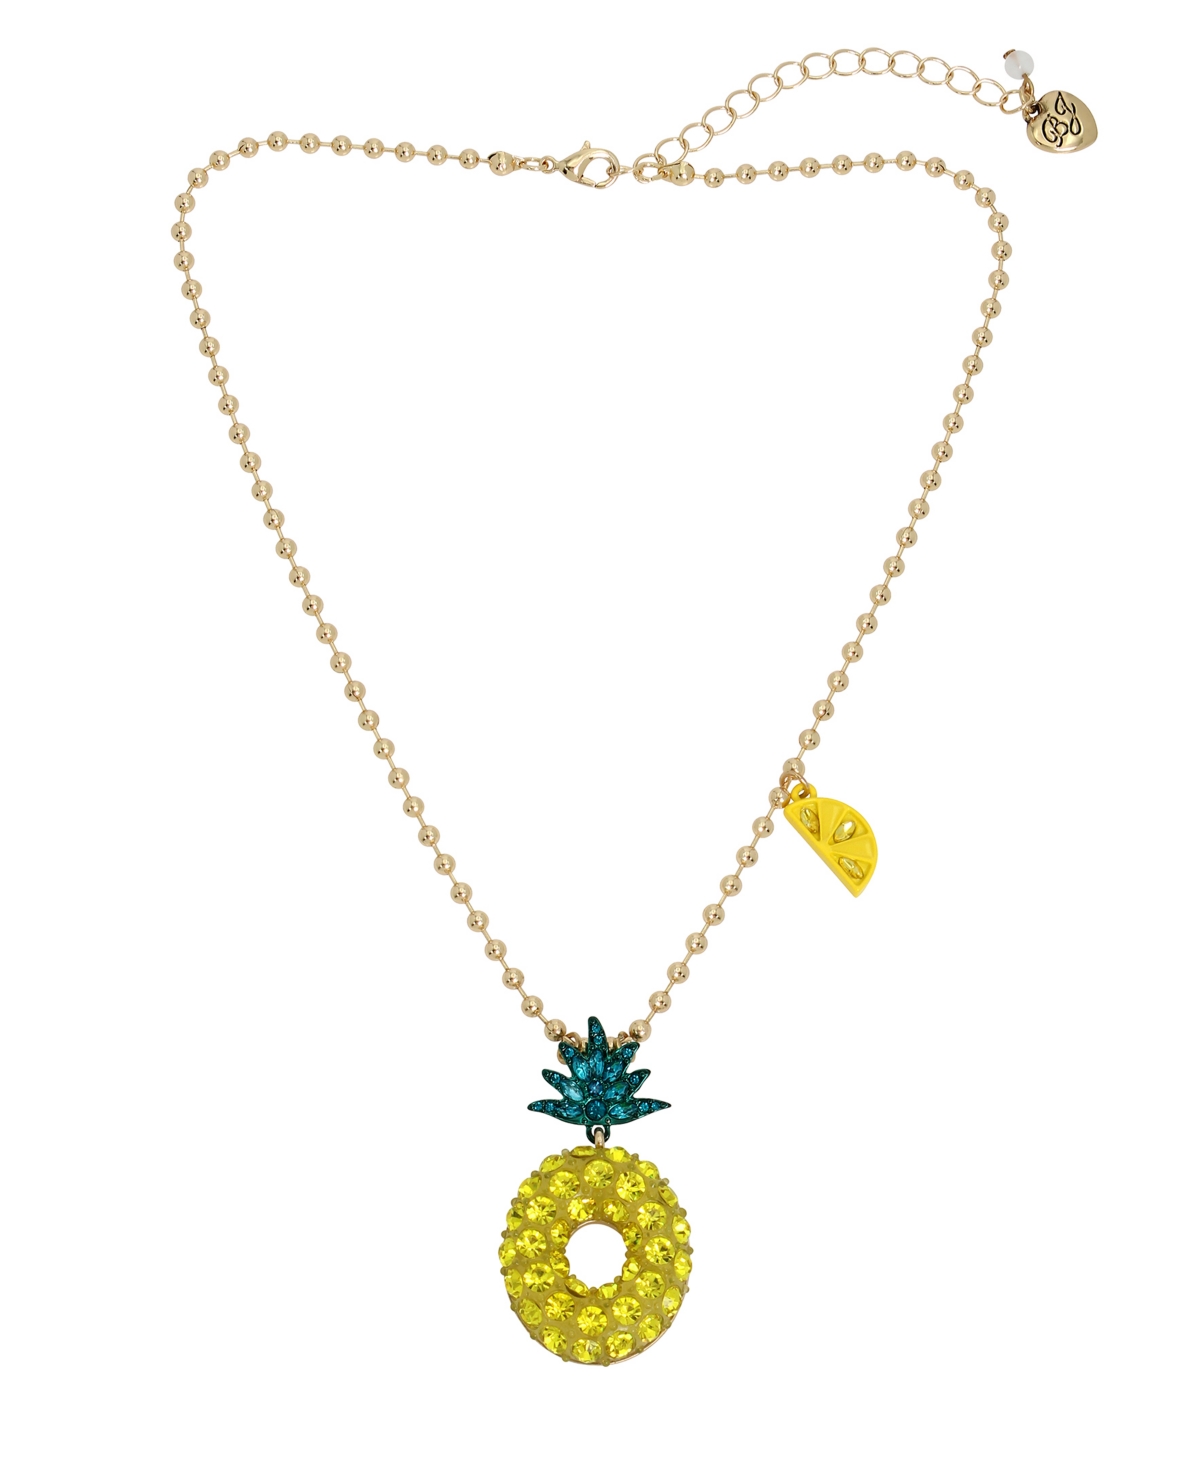 Faux Stone Pineapple Pendant Necklace - Yellow